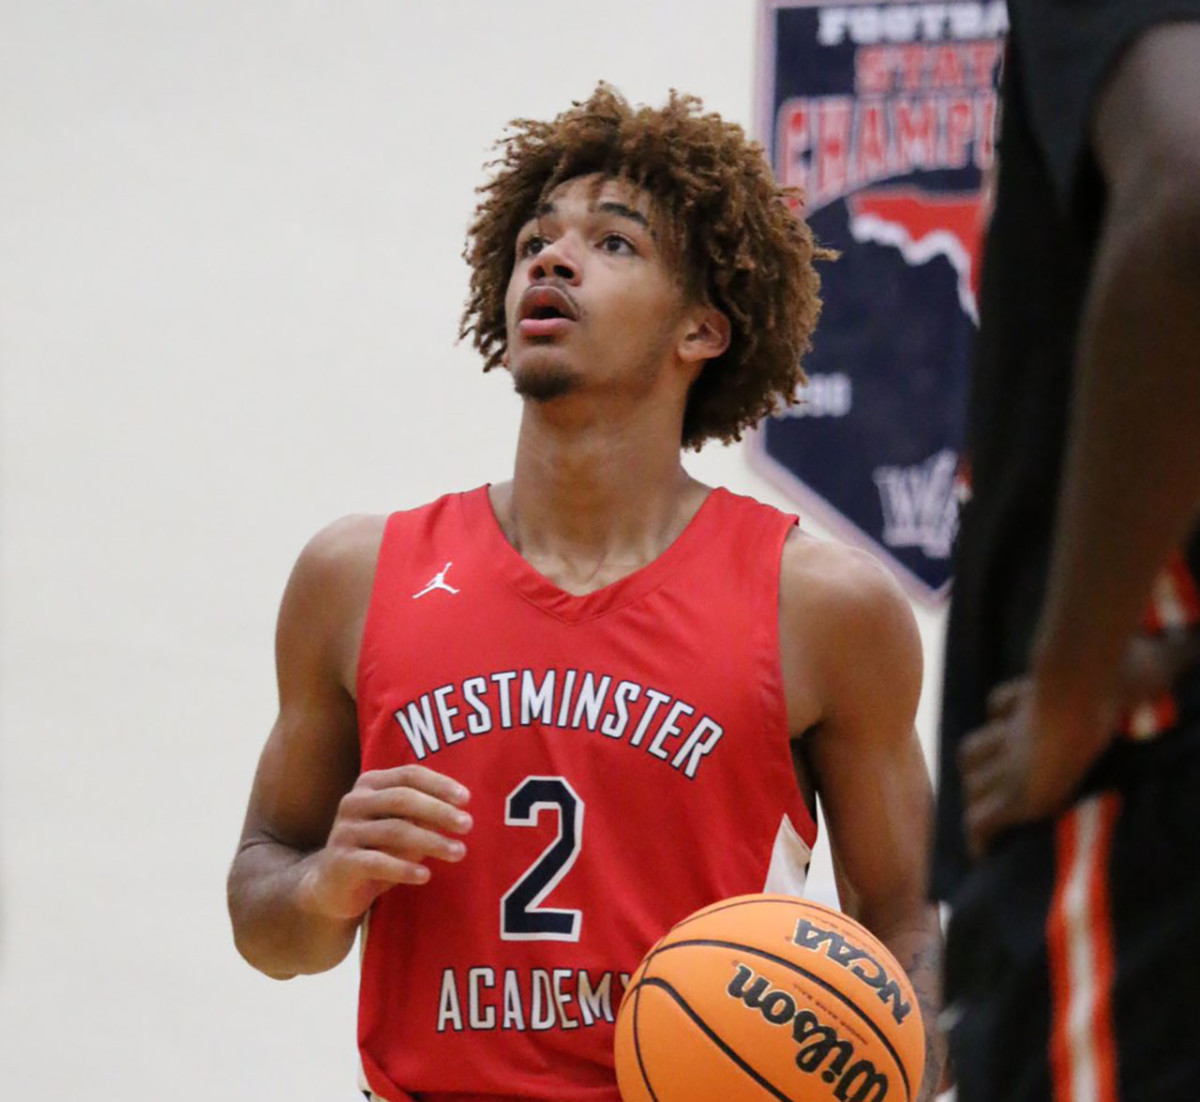 Westminster Academy's Dwayne Wimbley, Jr. was virtually unguardable, Tuesday, scoring 32 points in his team's playoff victory over Miami Country Day.